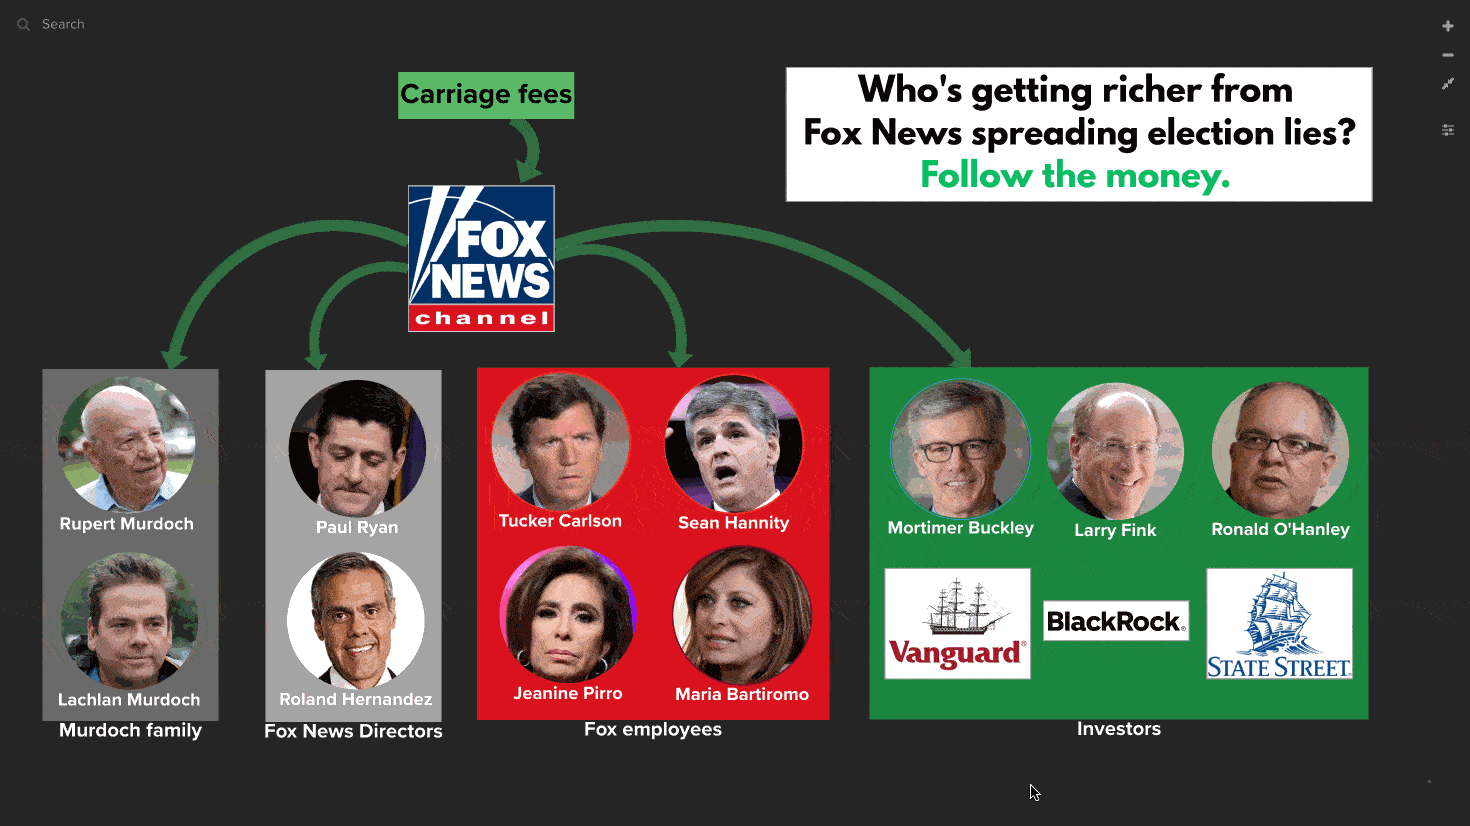 Who gets richer from Fox News spreading election lies